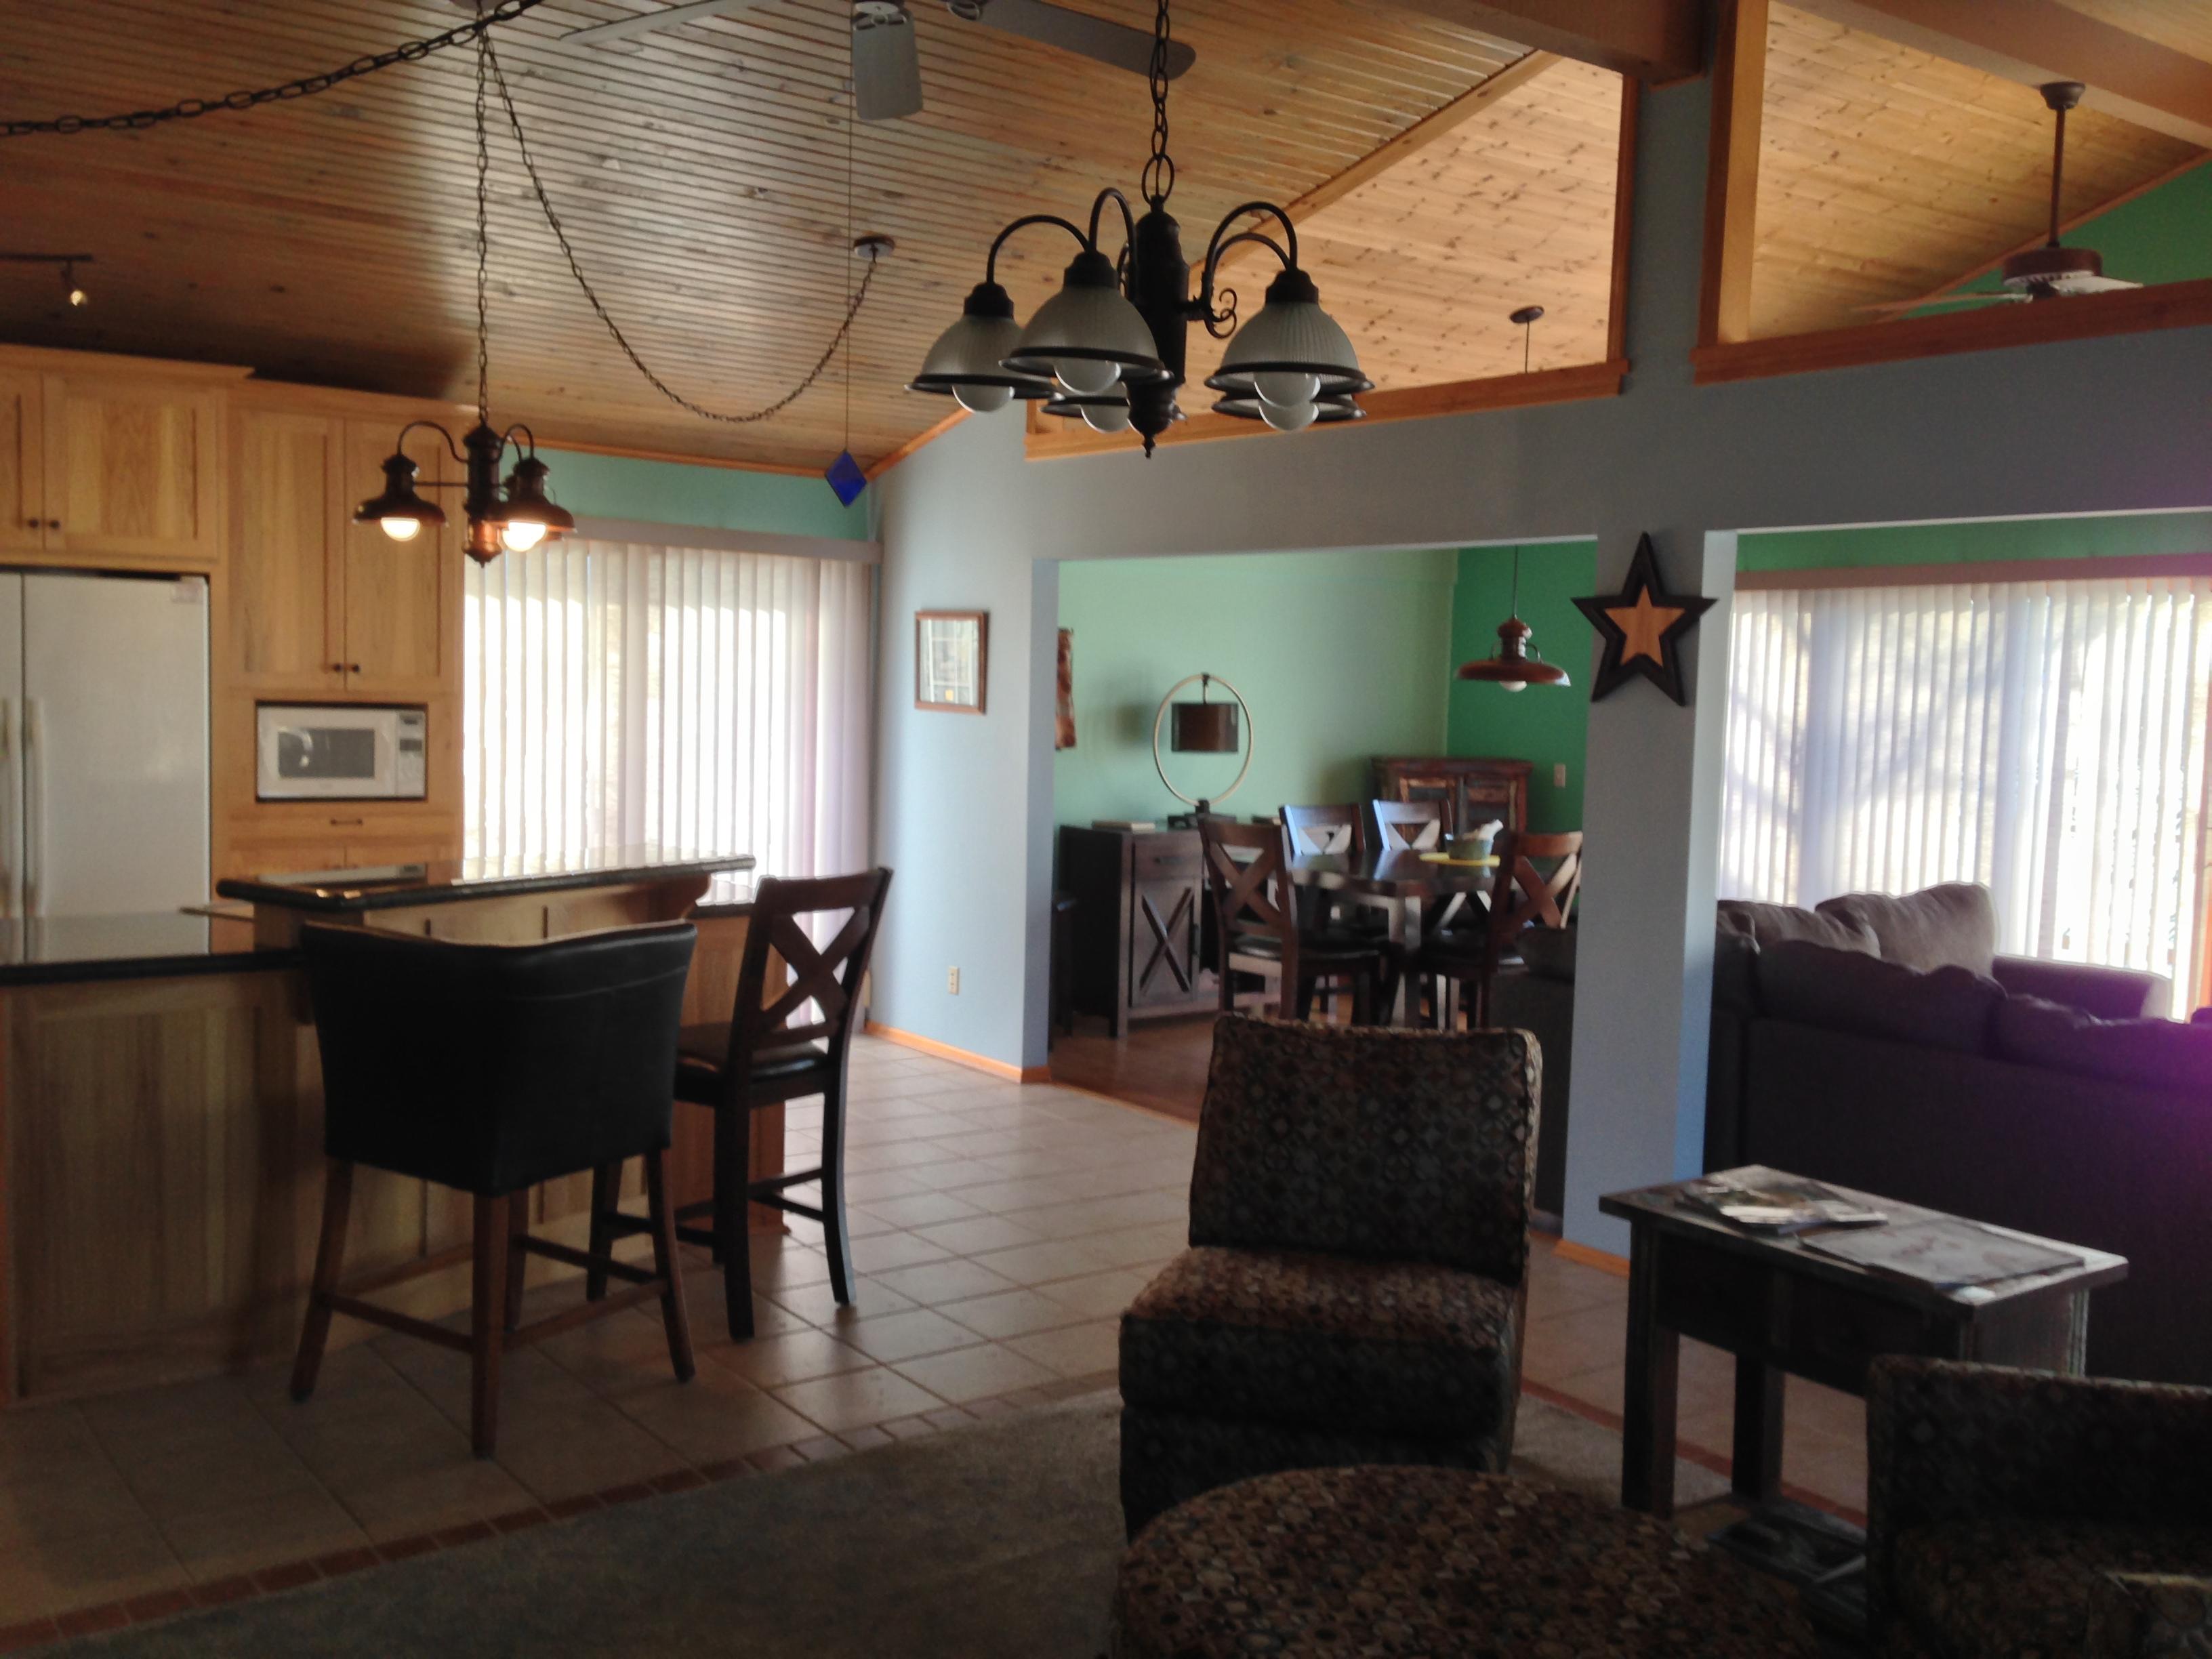 Family room with bar, TV and a Foosball game, fireplace(winter rentals) opens onto deck.